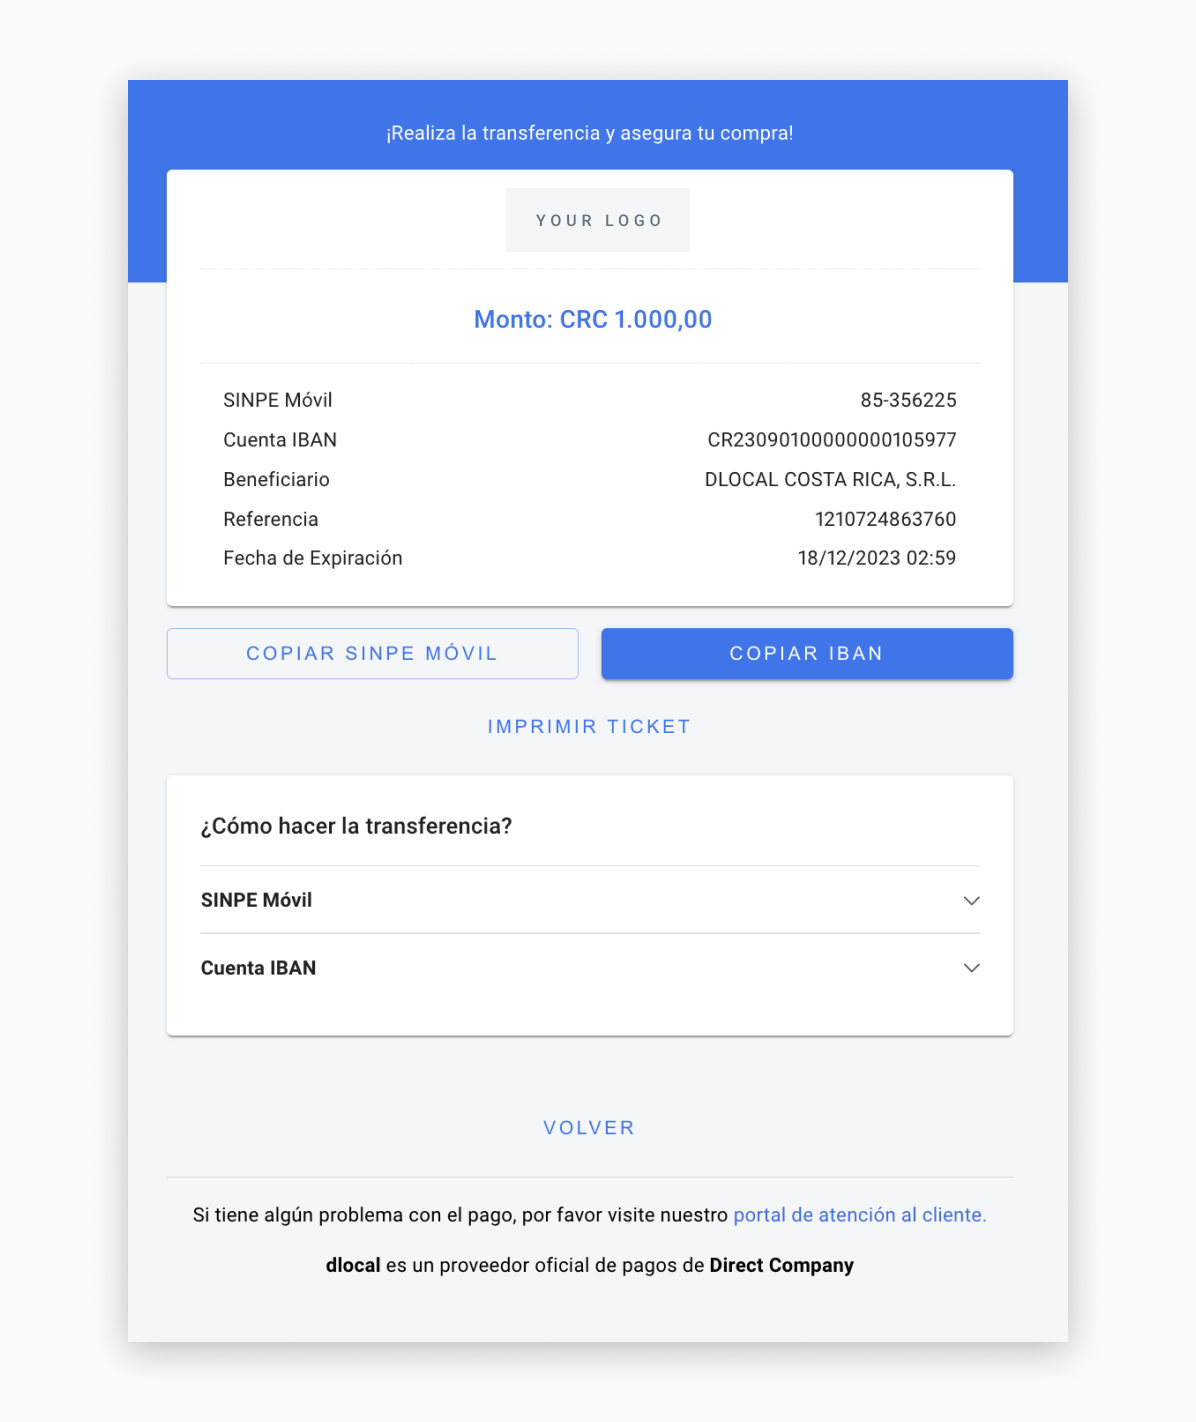 PayCash UI built with the information in the example above.